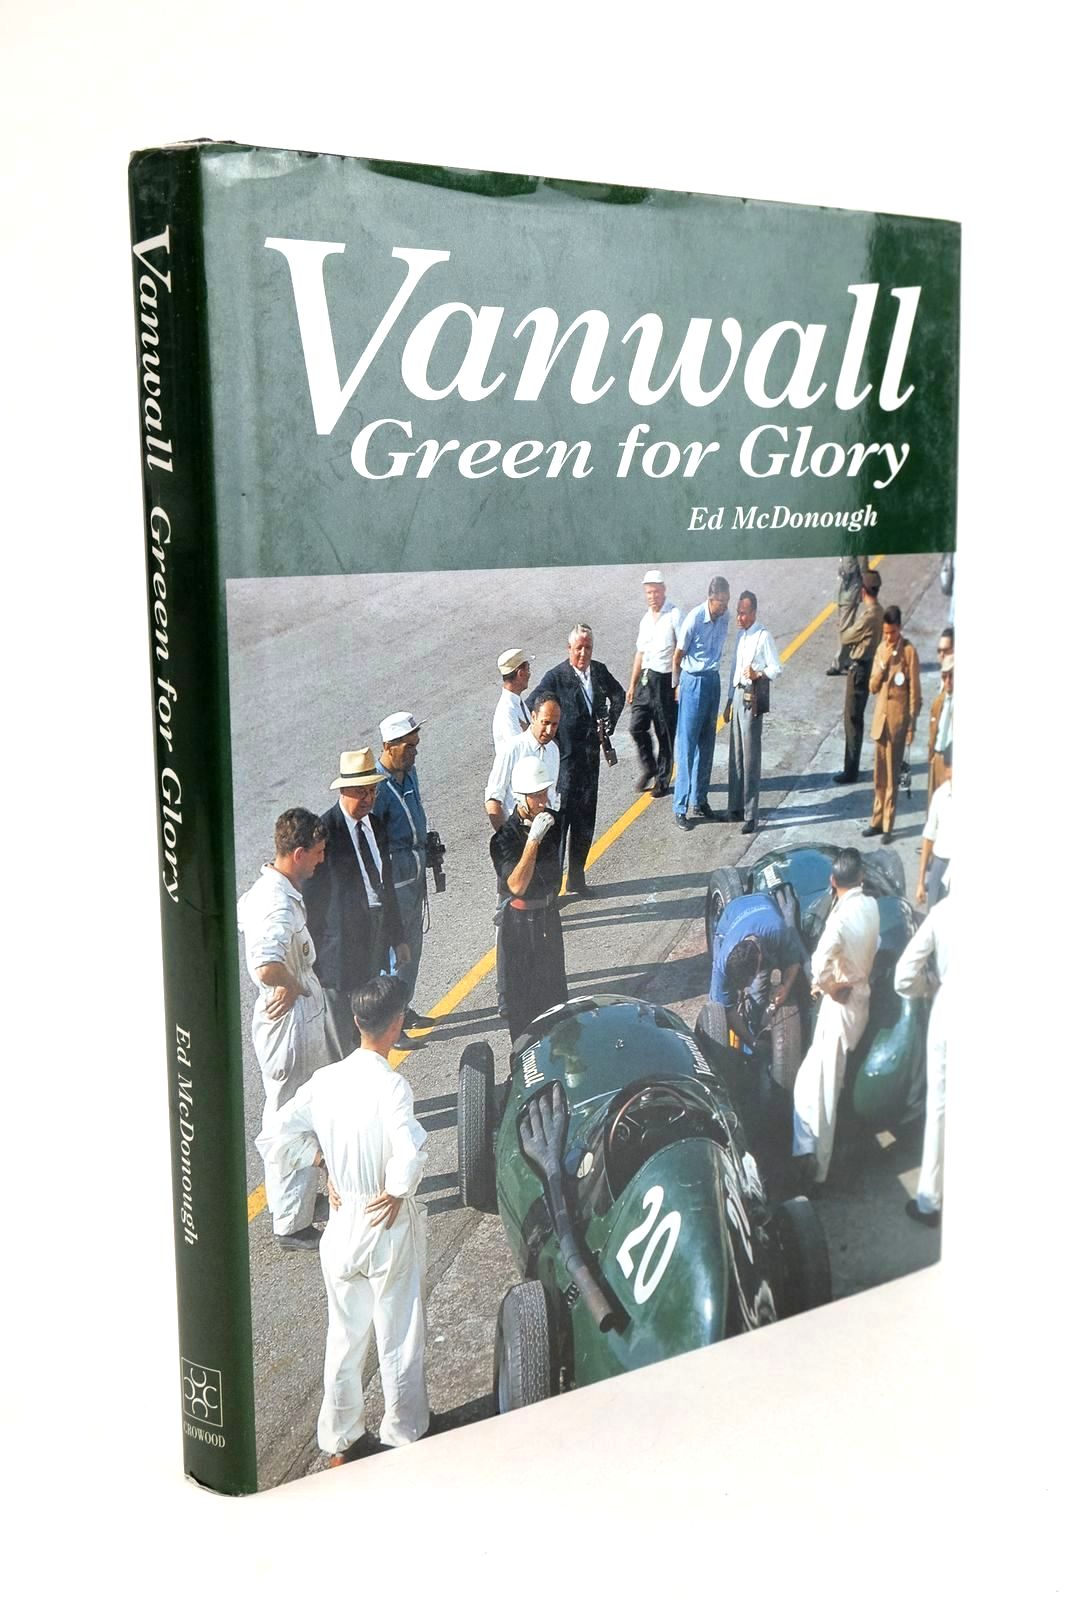 Photo of VANWALL: GREEN FOR GLORY written by McDonough, Ed. published by The Crowood Press (STOCK CODE: 1324137)  for sale by Stella & Rose's Books